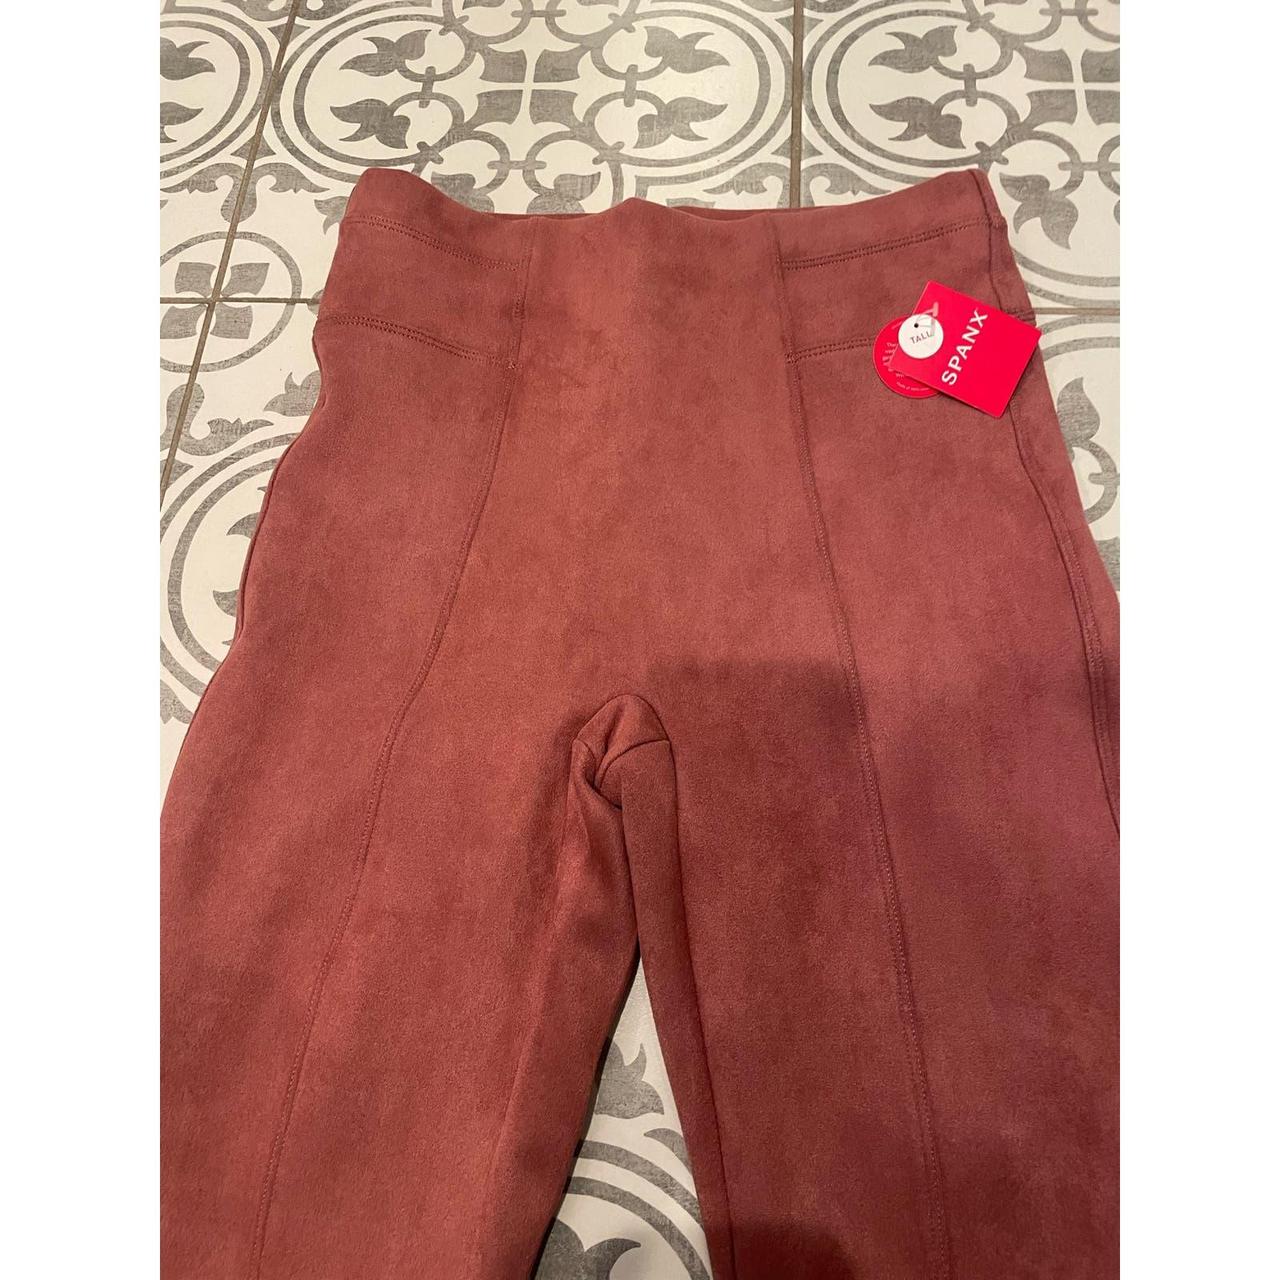 NWT Spanx Faux Suede Legging in Rich Rose size small - Depop